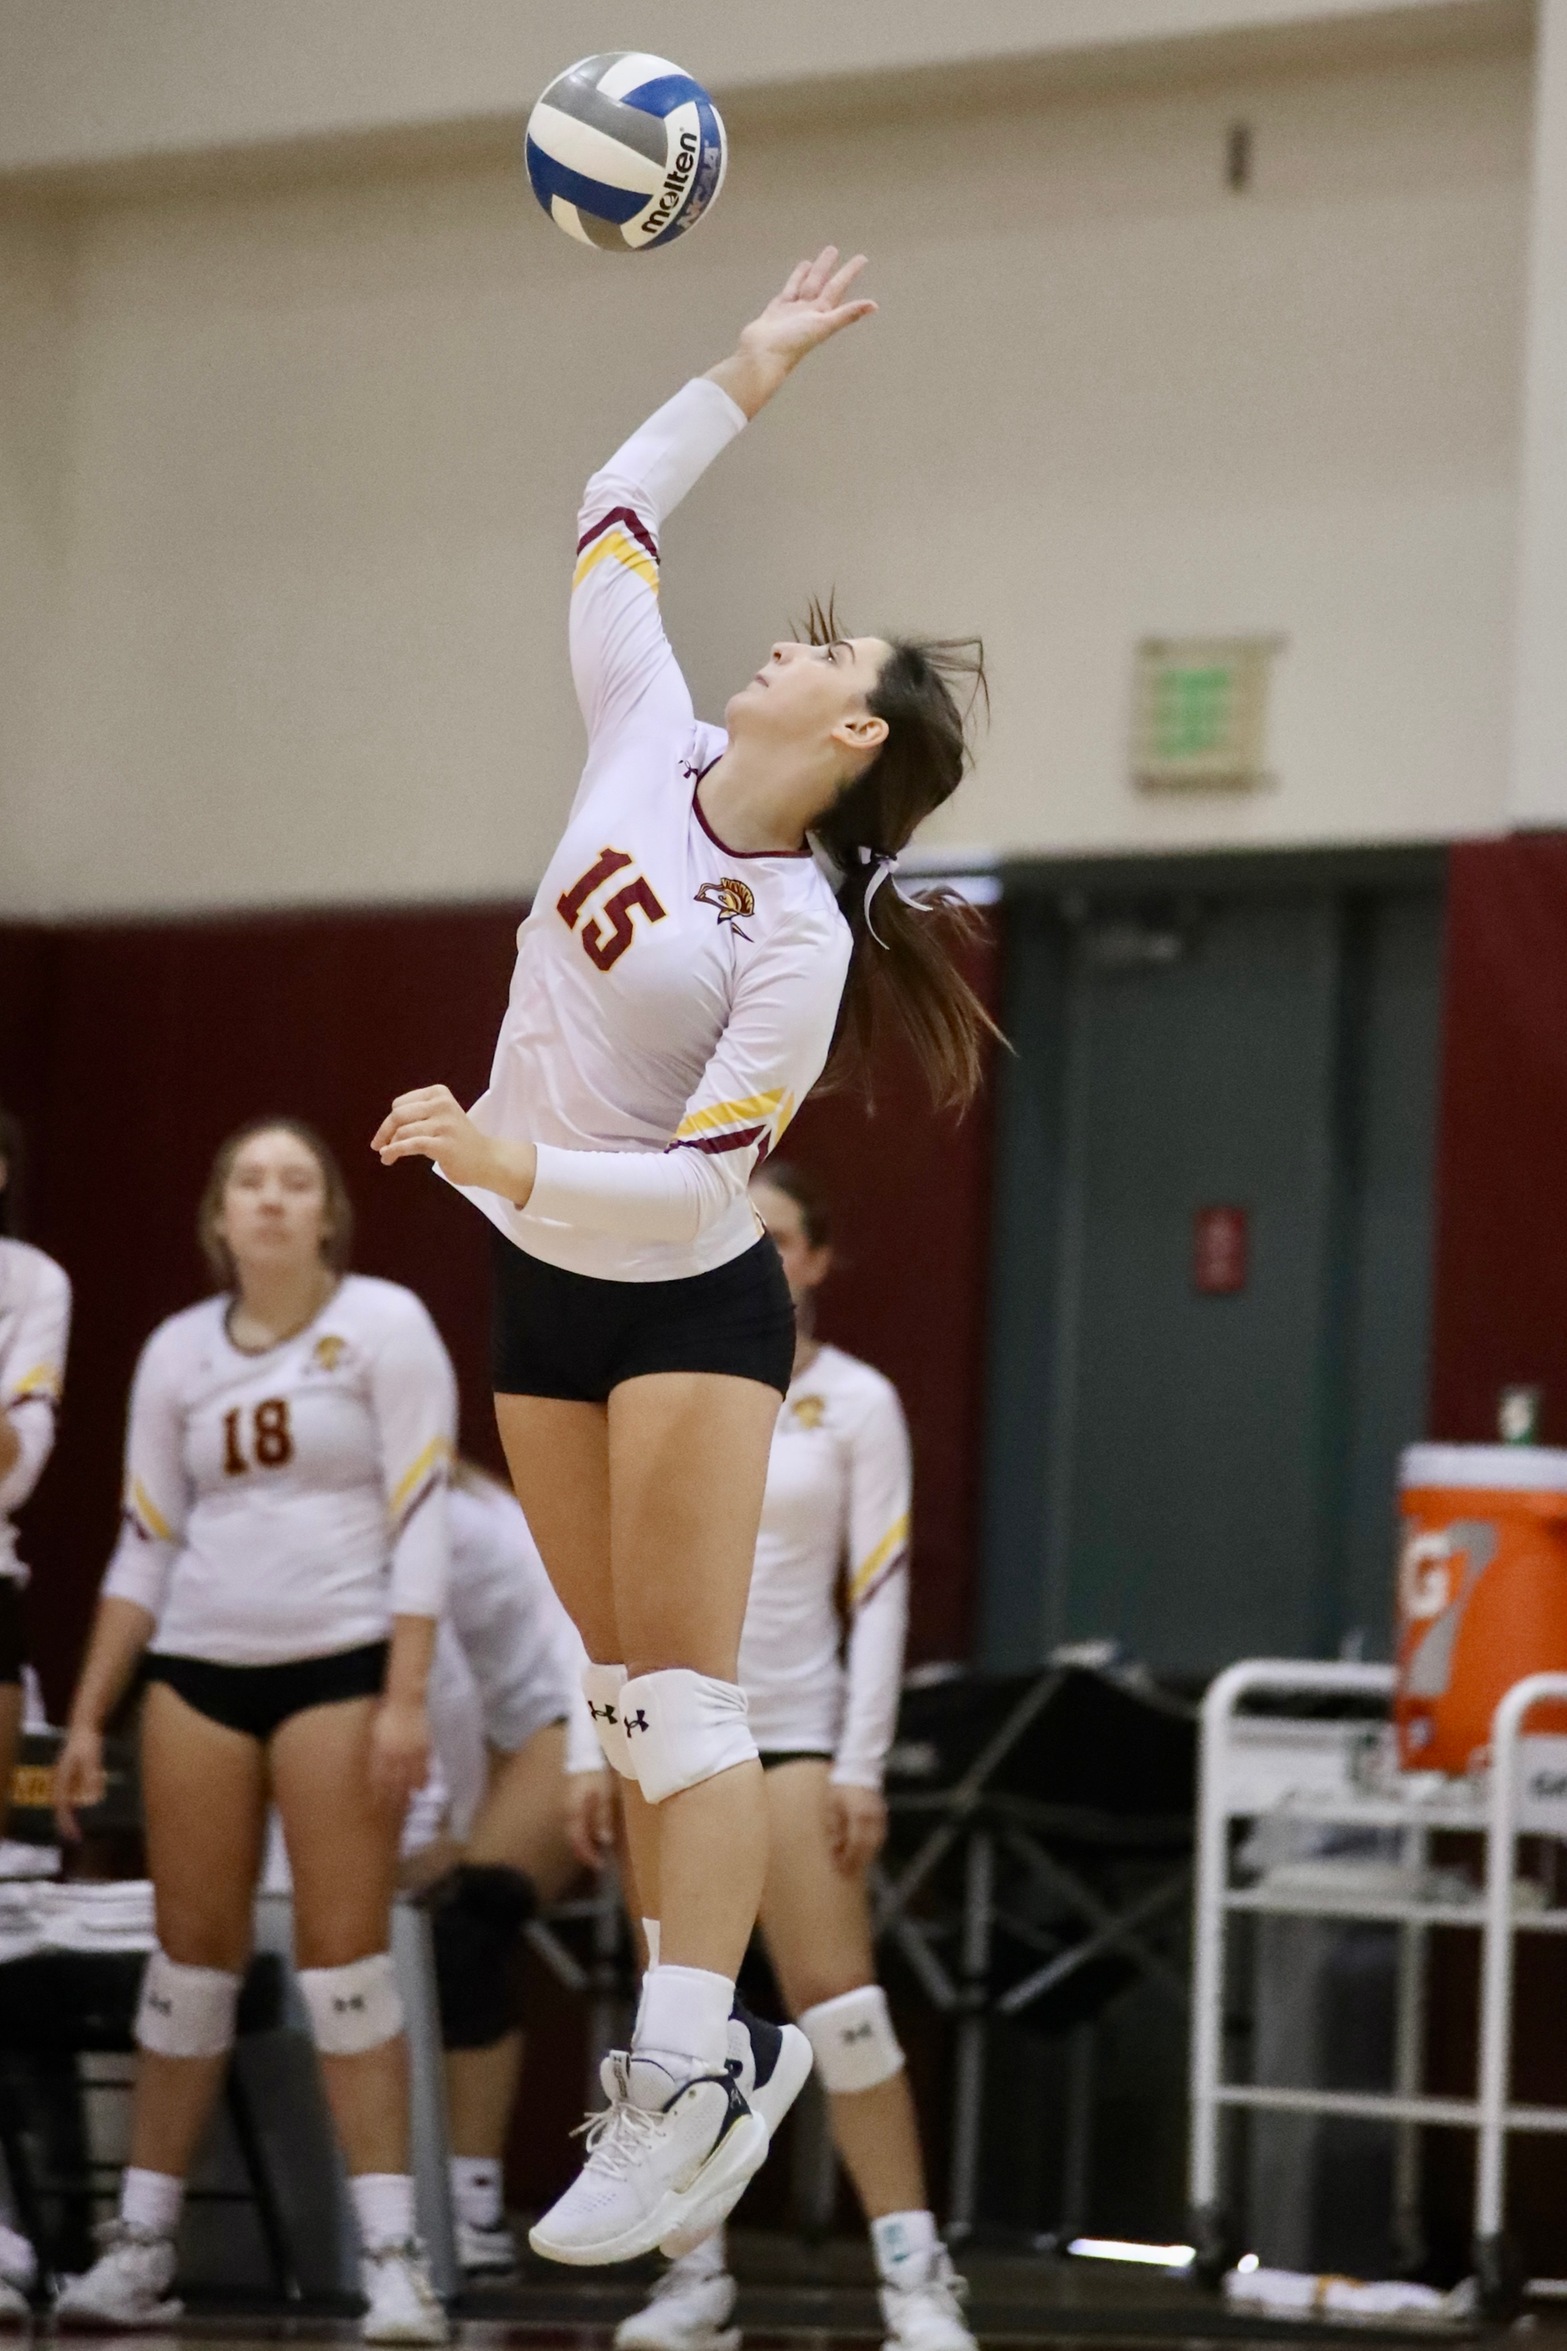 Reese Roper delivers one of her eight aces in the Lancers win over Antelope Valley (photo by Michael Watkins).